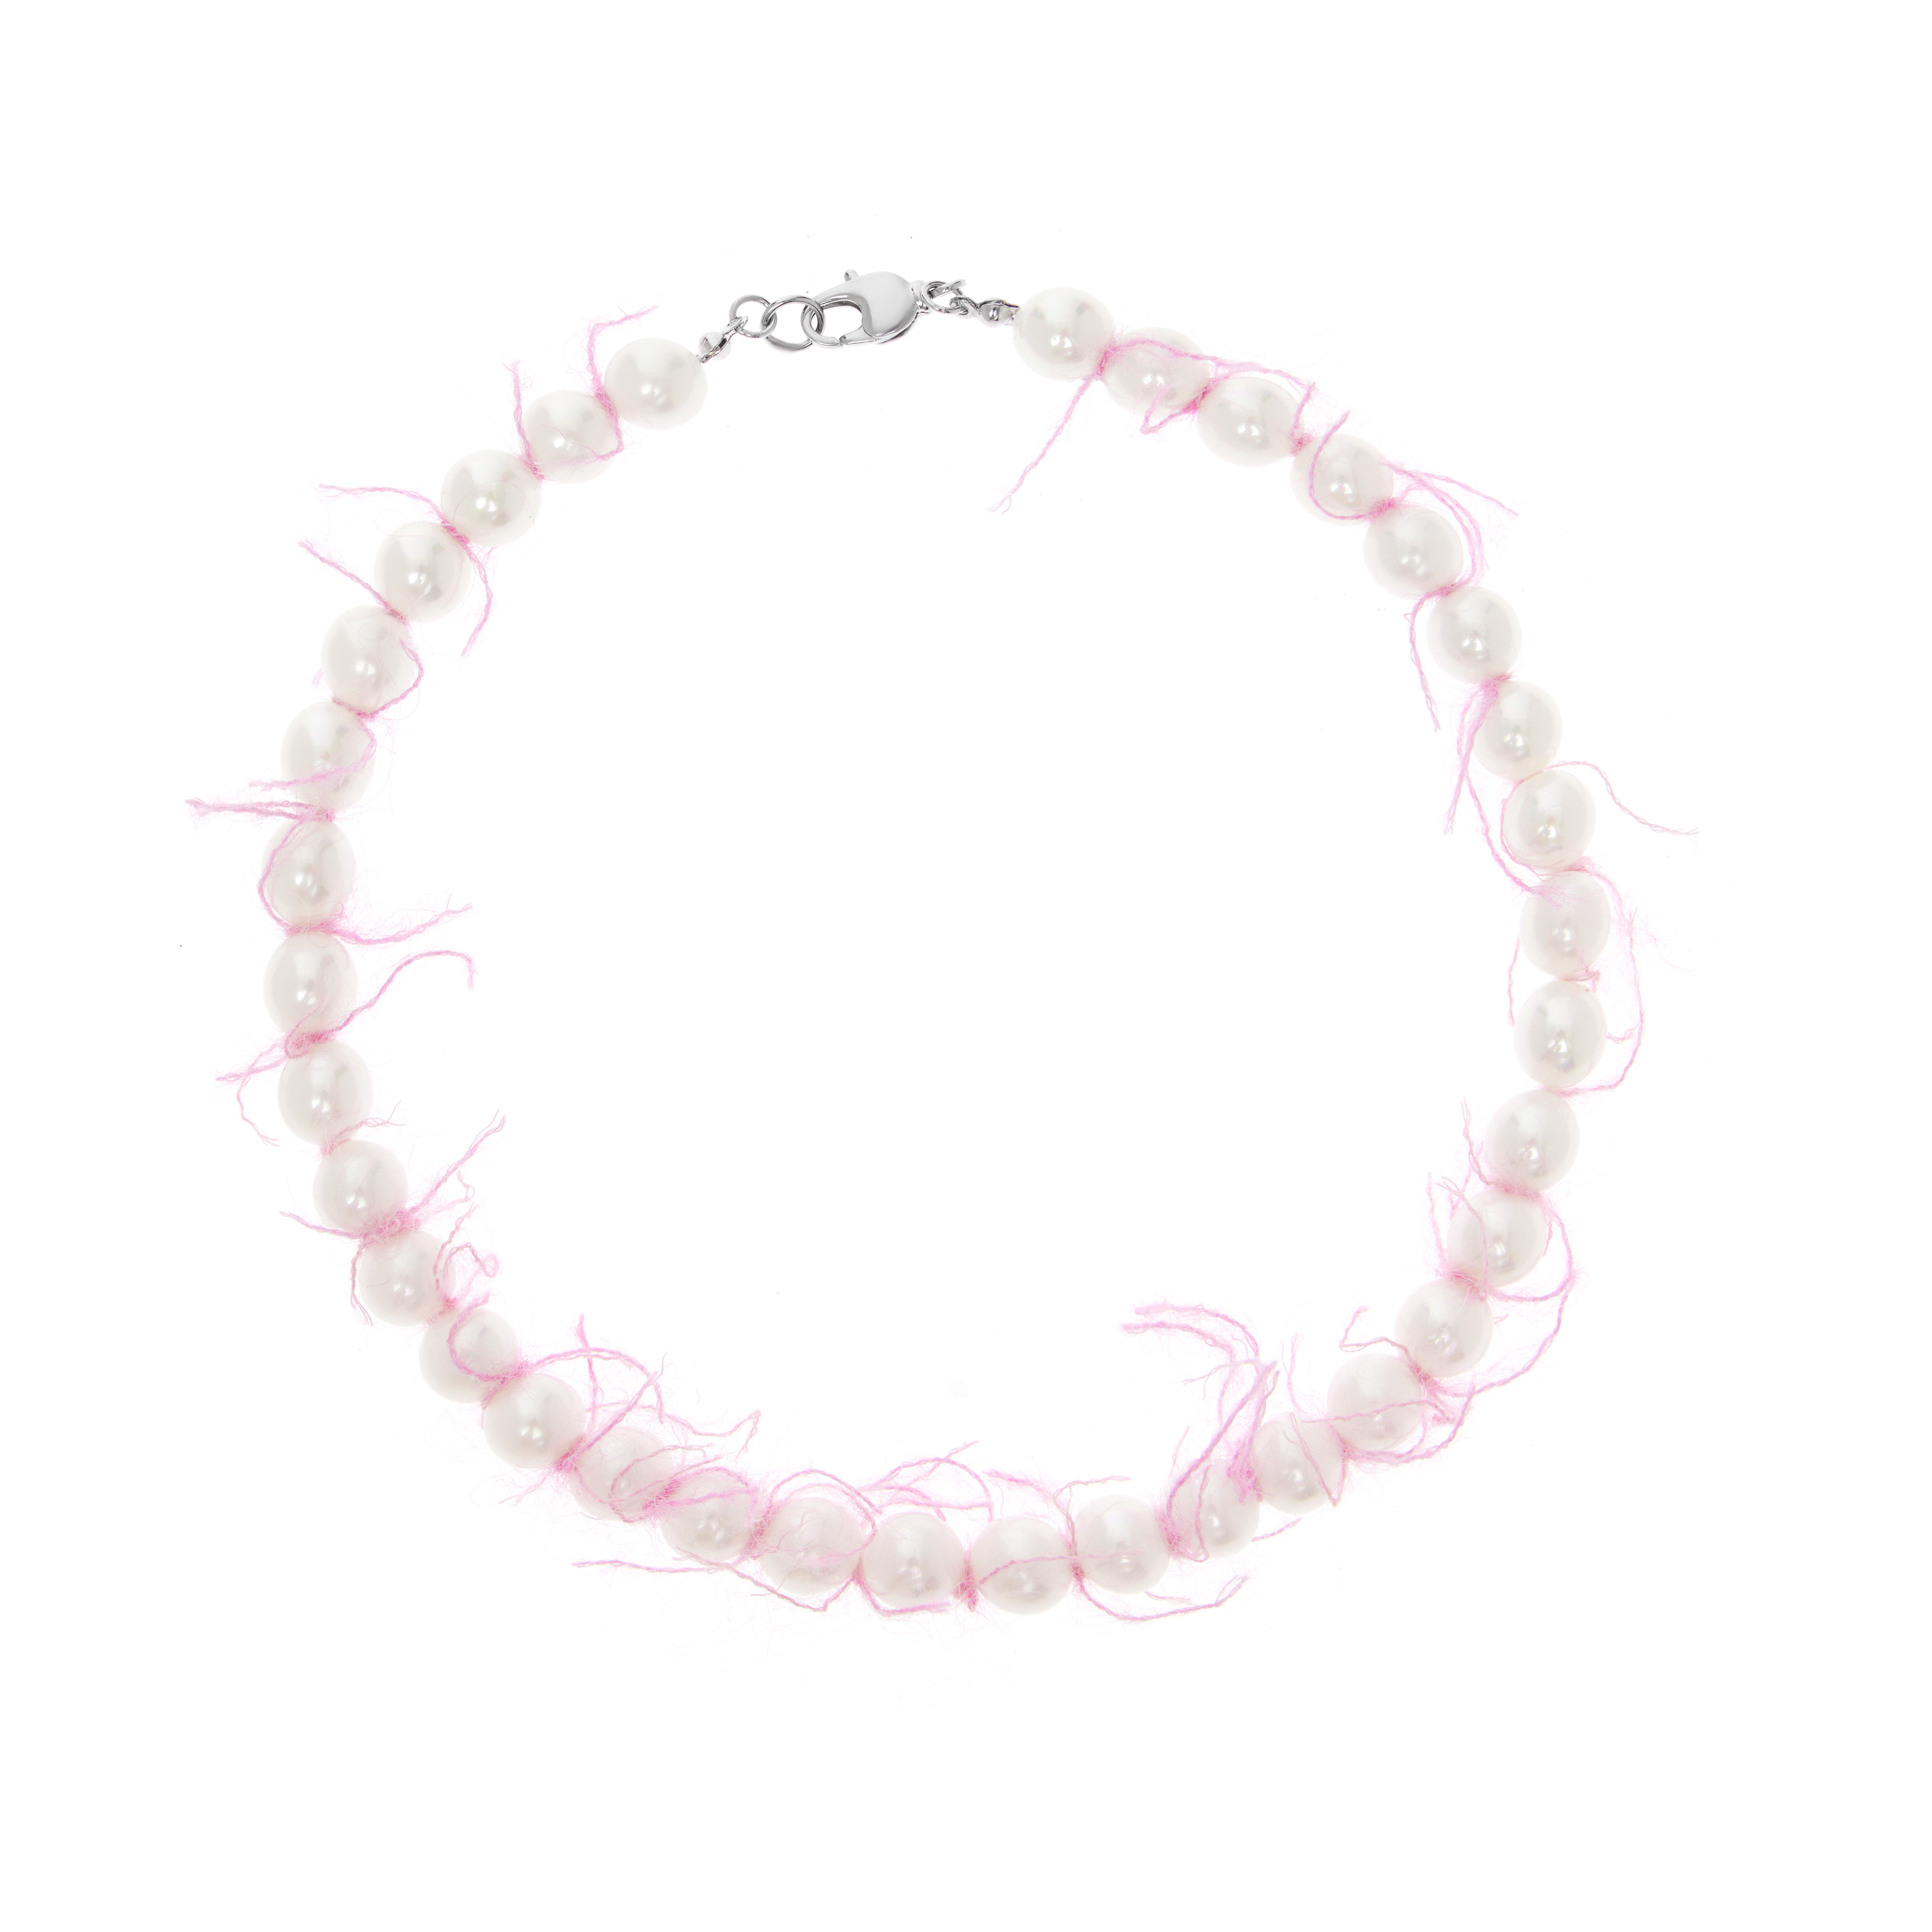 HOLLY JUNE Колье Fluffy Pearl Necklace holly june колье fluffy pearl necklace